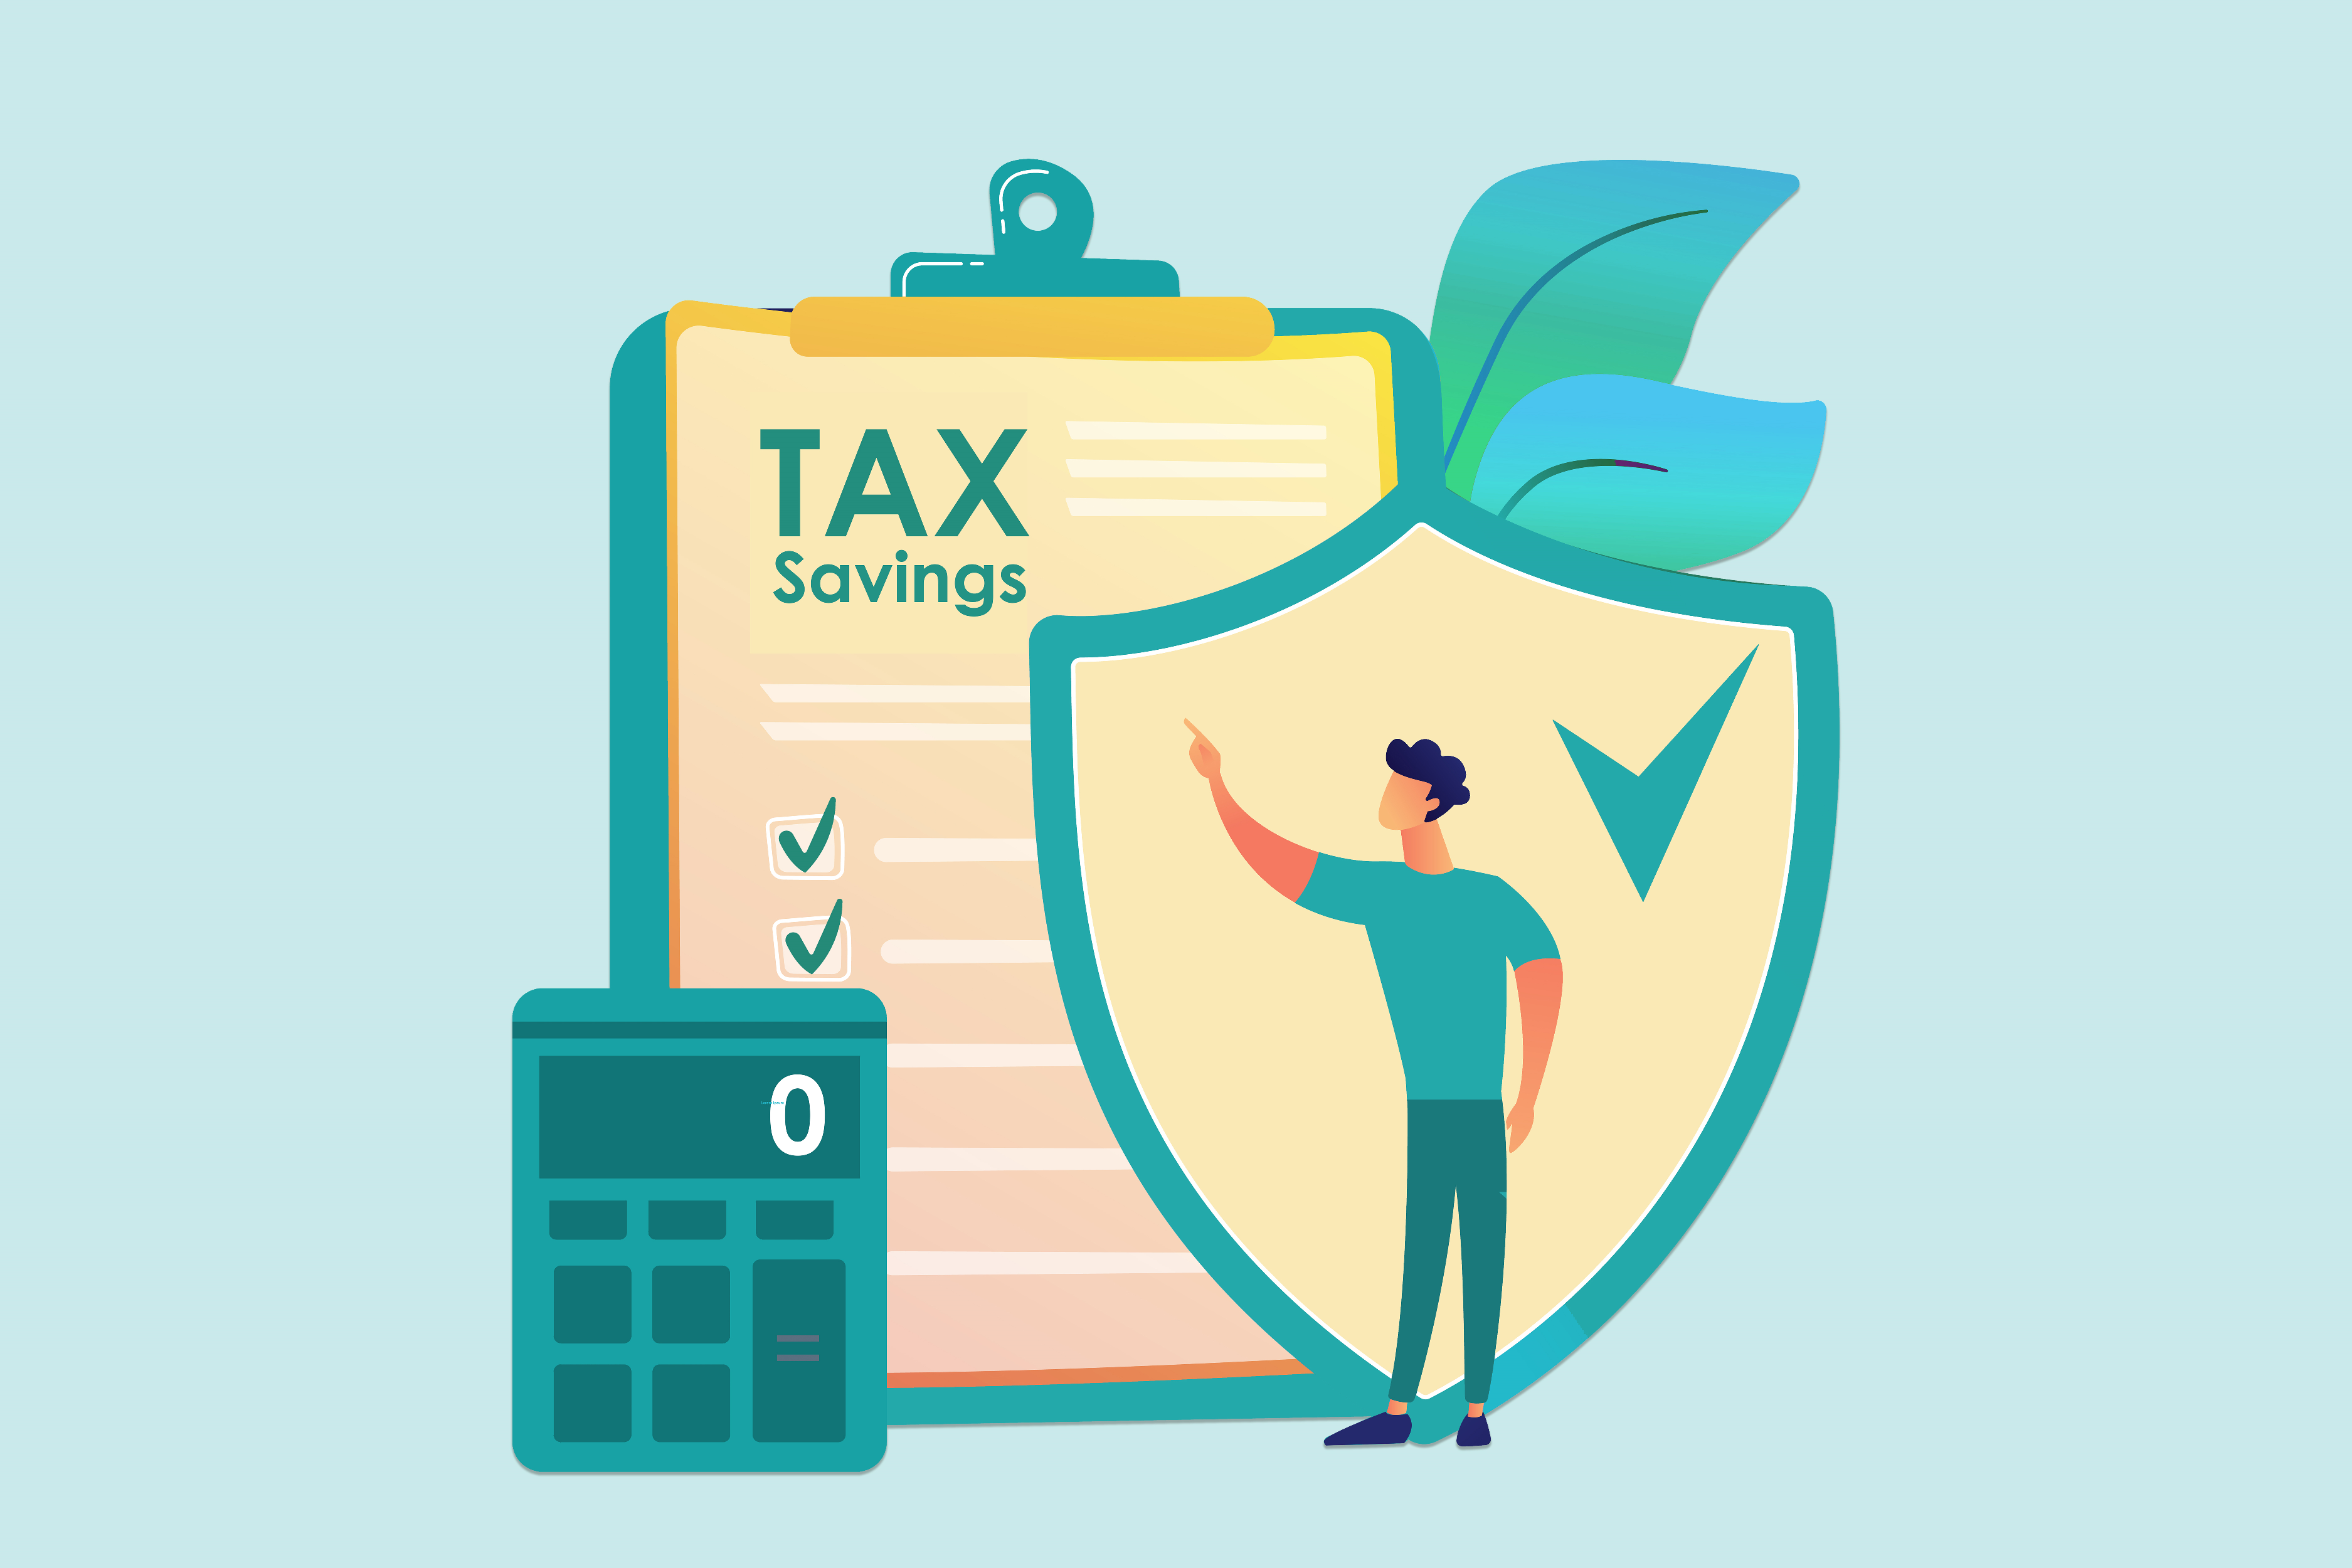 personal health insurance tax benefits - vector picture representing tax